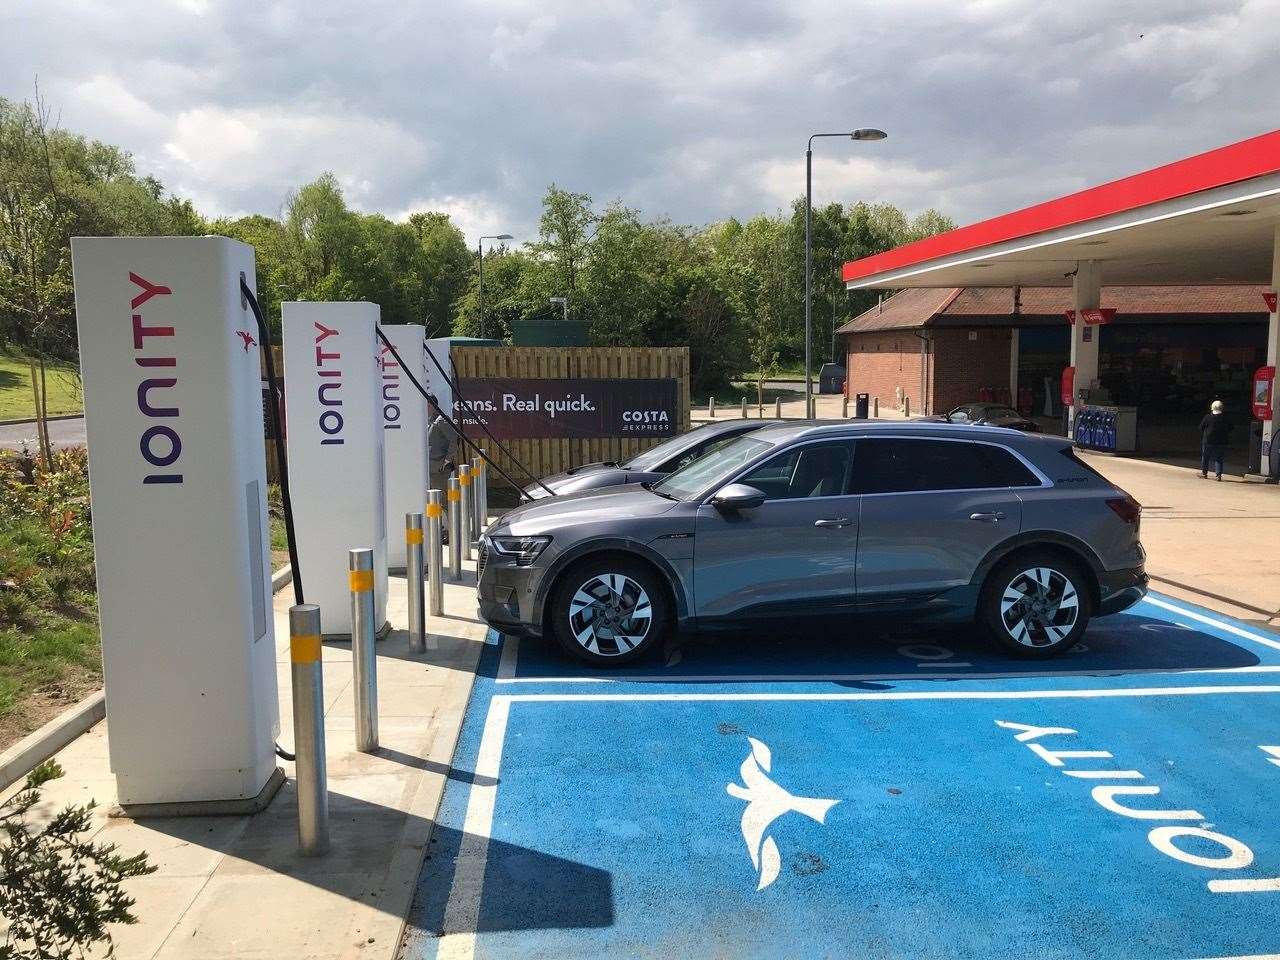 The new 350kw charging station installed at Maidstone services